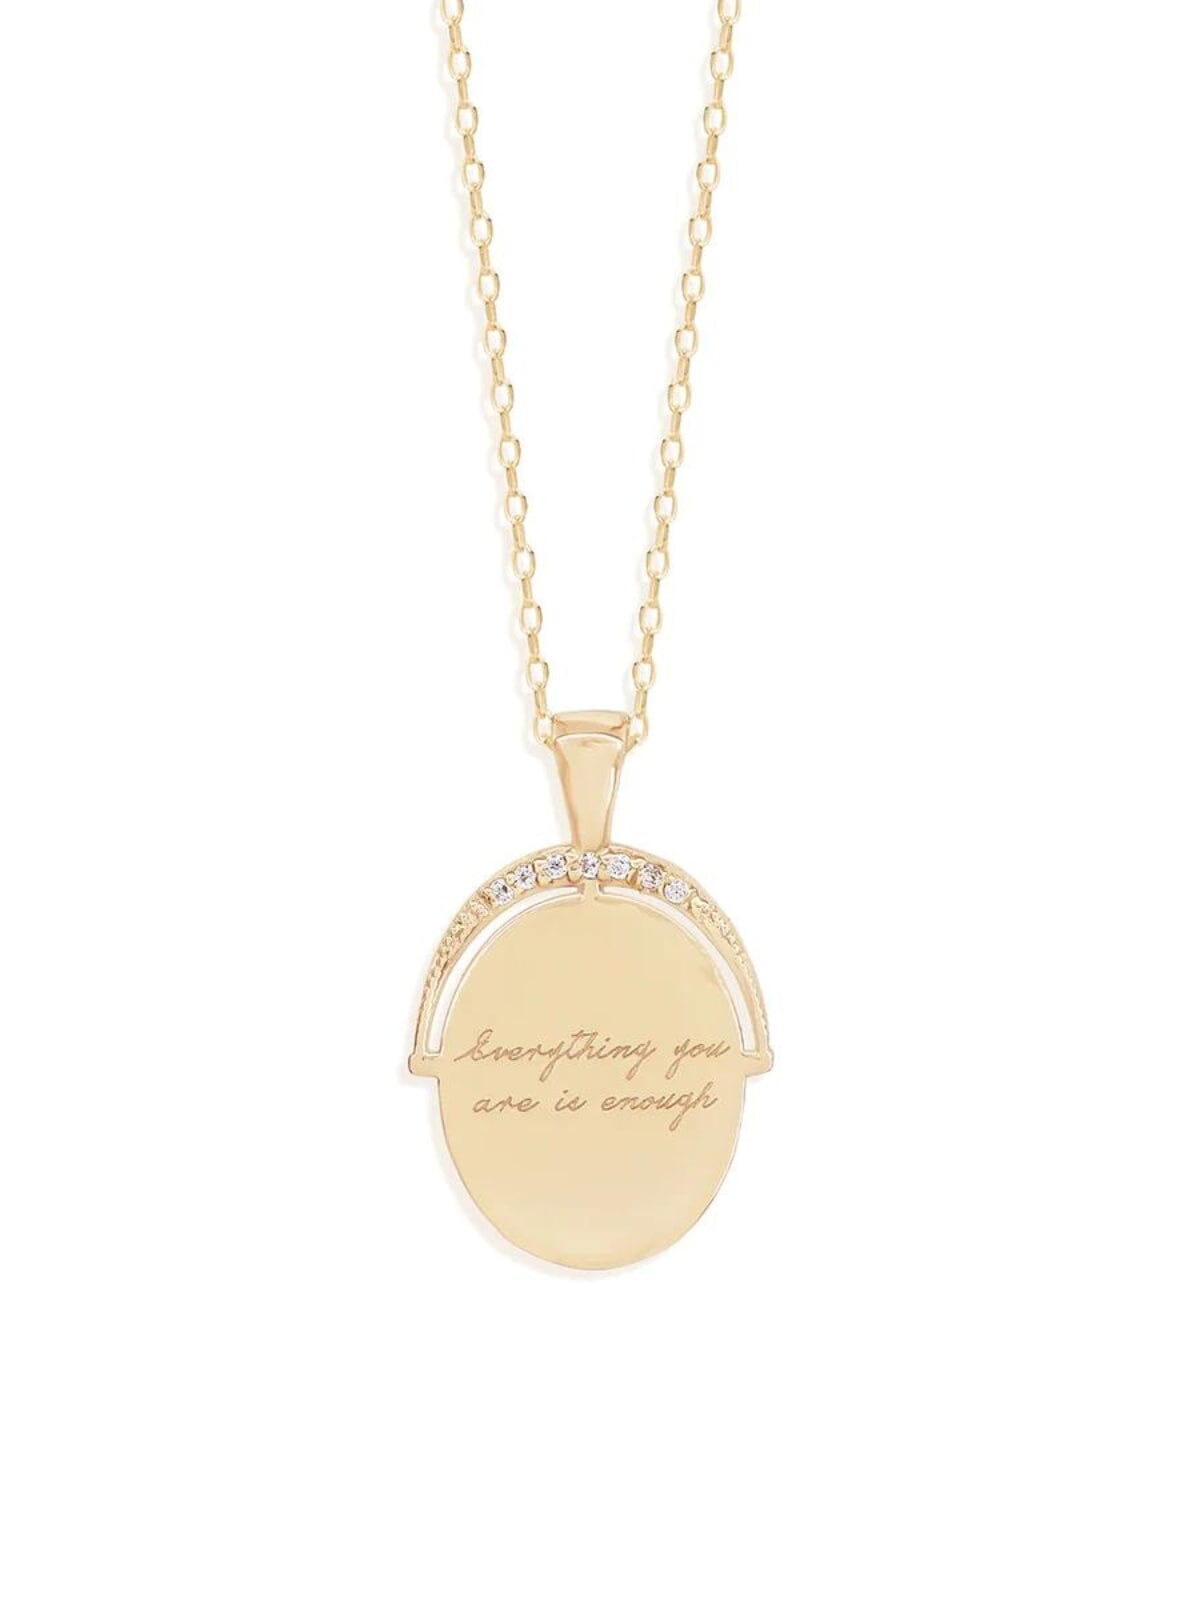 By Charlotte | 14k Gold Everything You Are Is Enough Necklace | Perlu